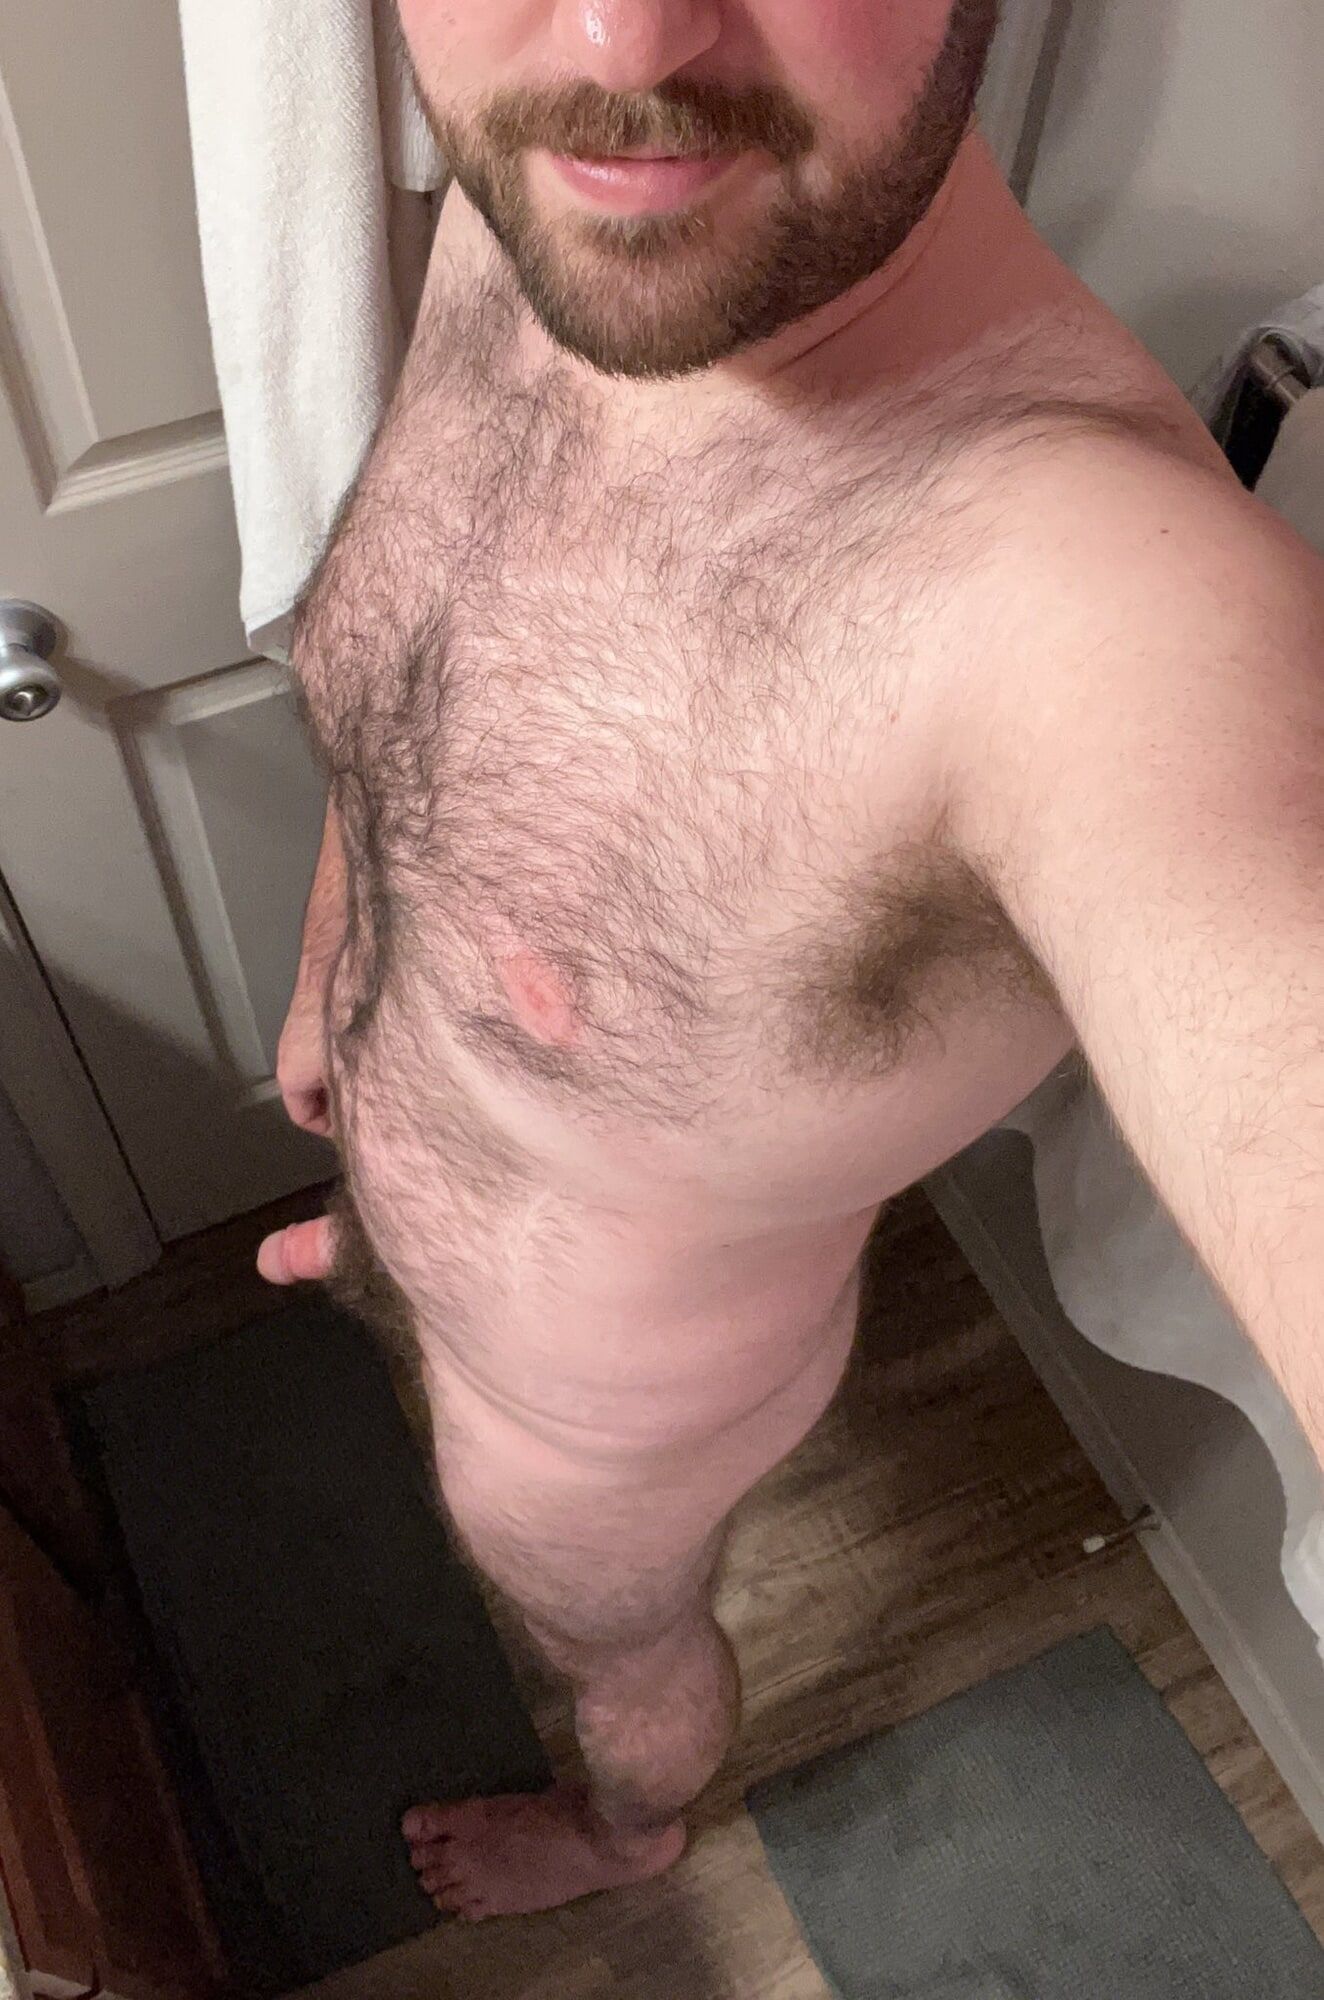 My hairy chest and soft cock